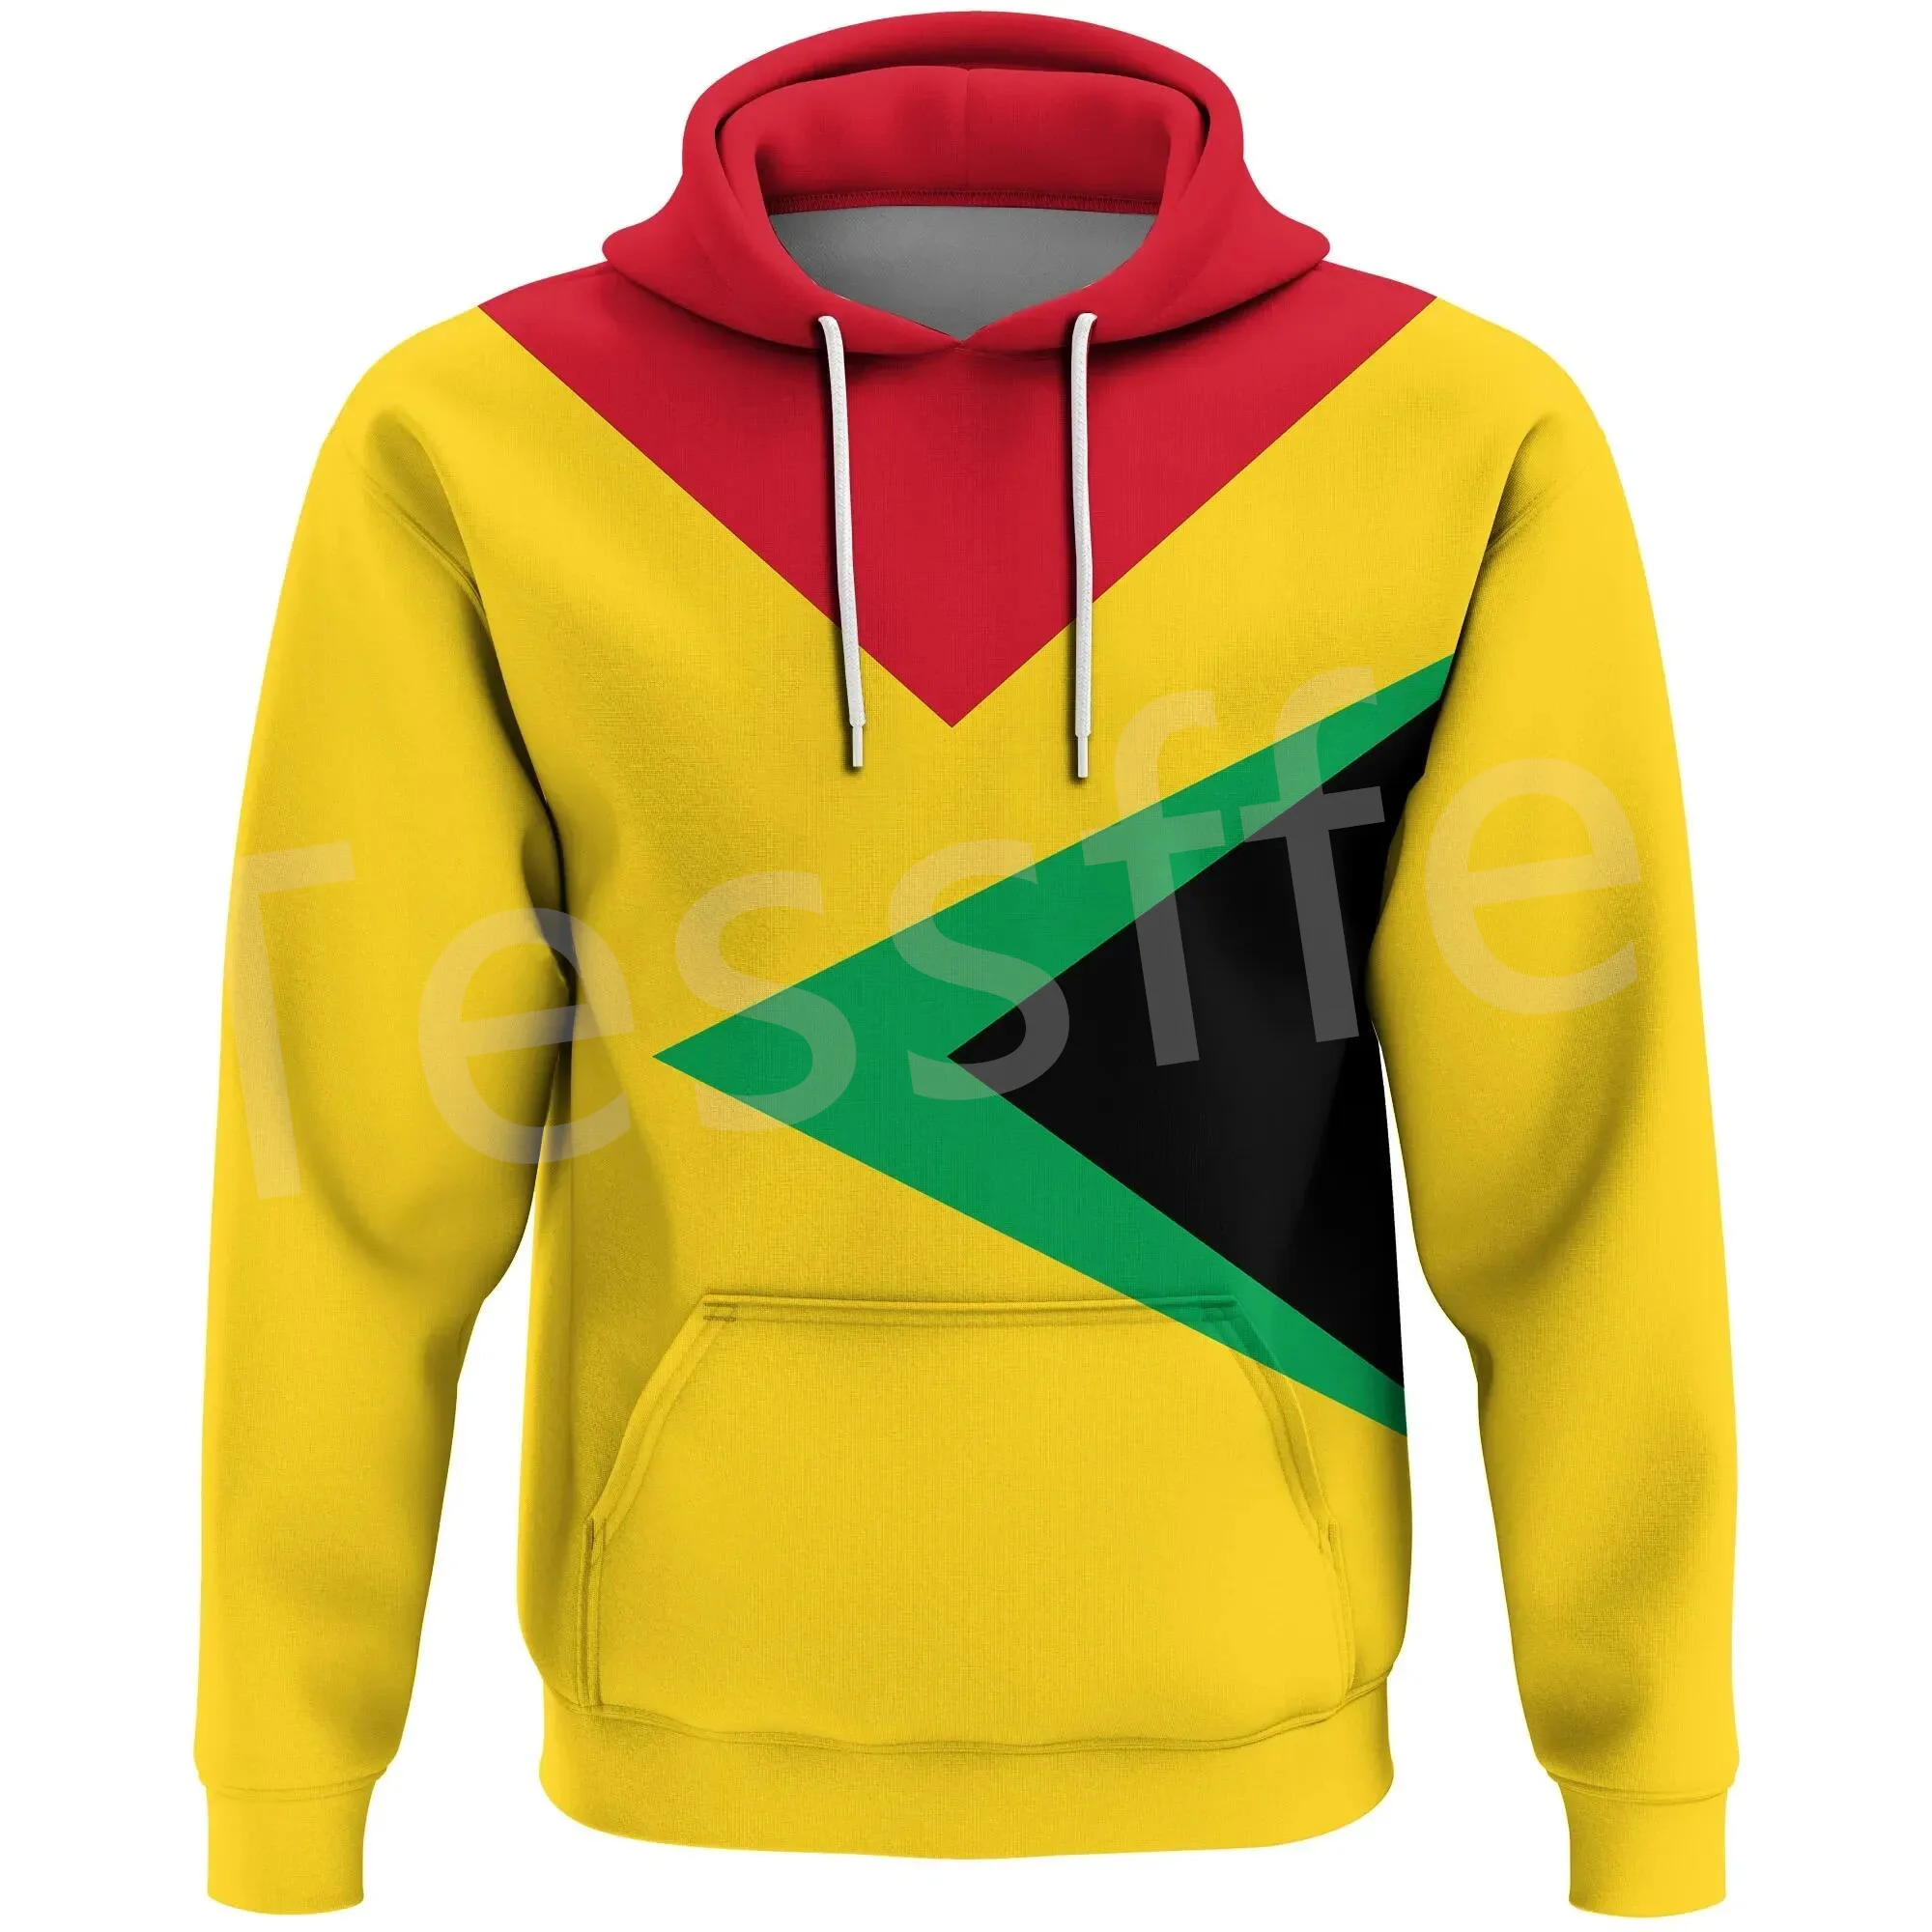 Tessffel South America County Guyana Flag Tribe Tattoo Retro Tracksuit 3DPrint Men/Women Pullover Casual Funny Jacket Hoodies A2